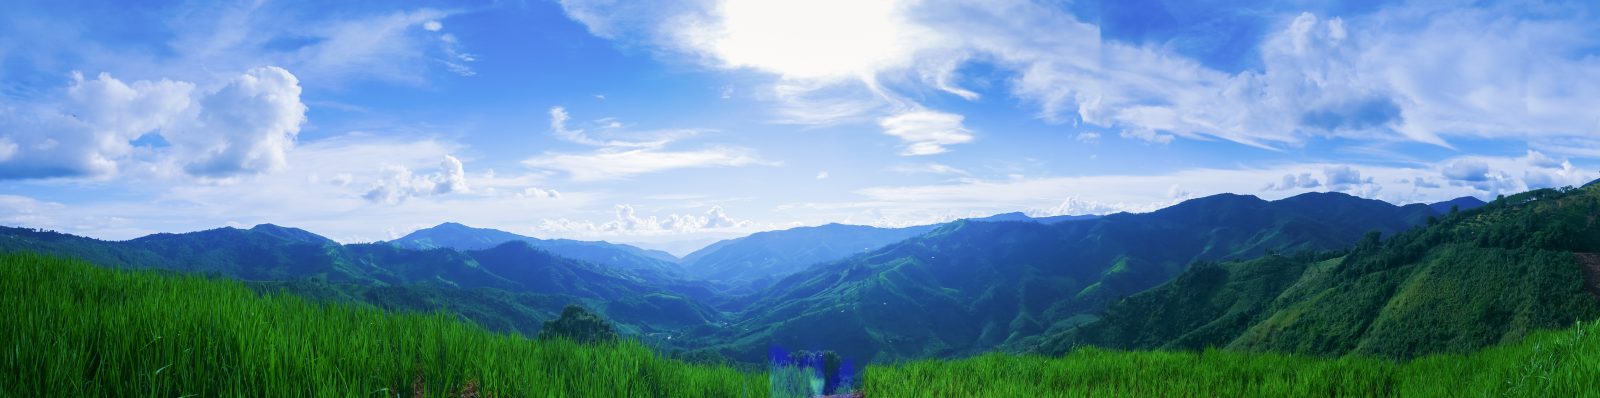 Landscape natural beautiful mountains and blue sky panorama